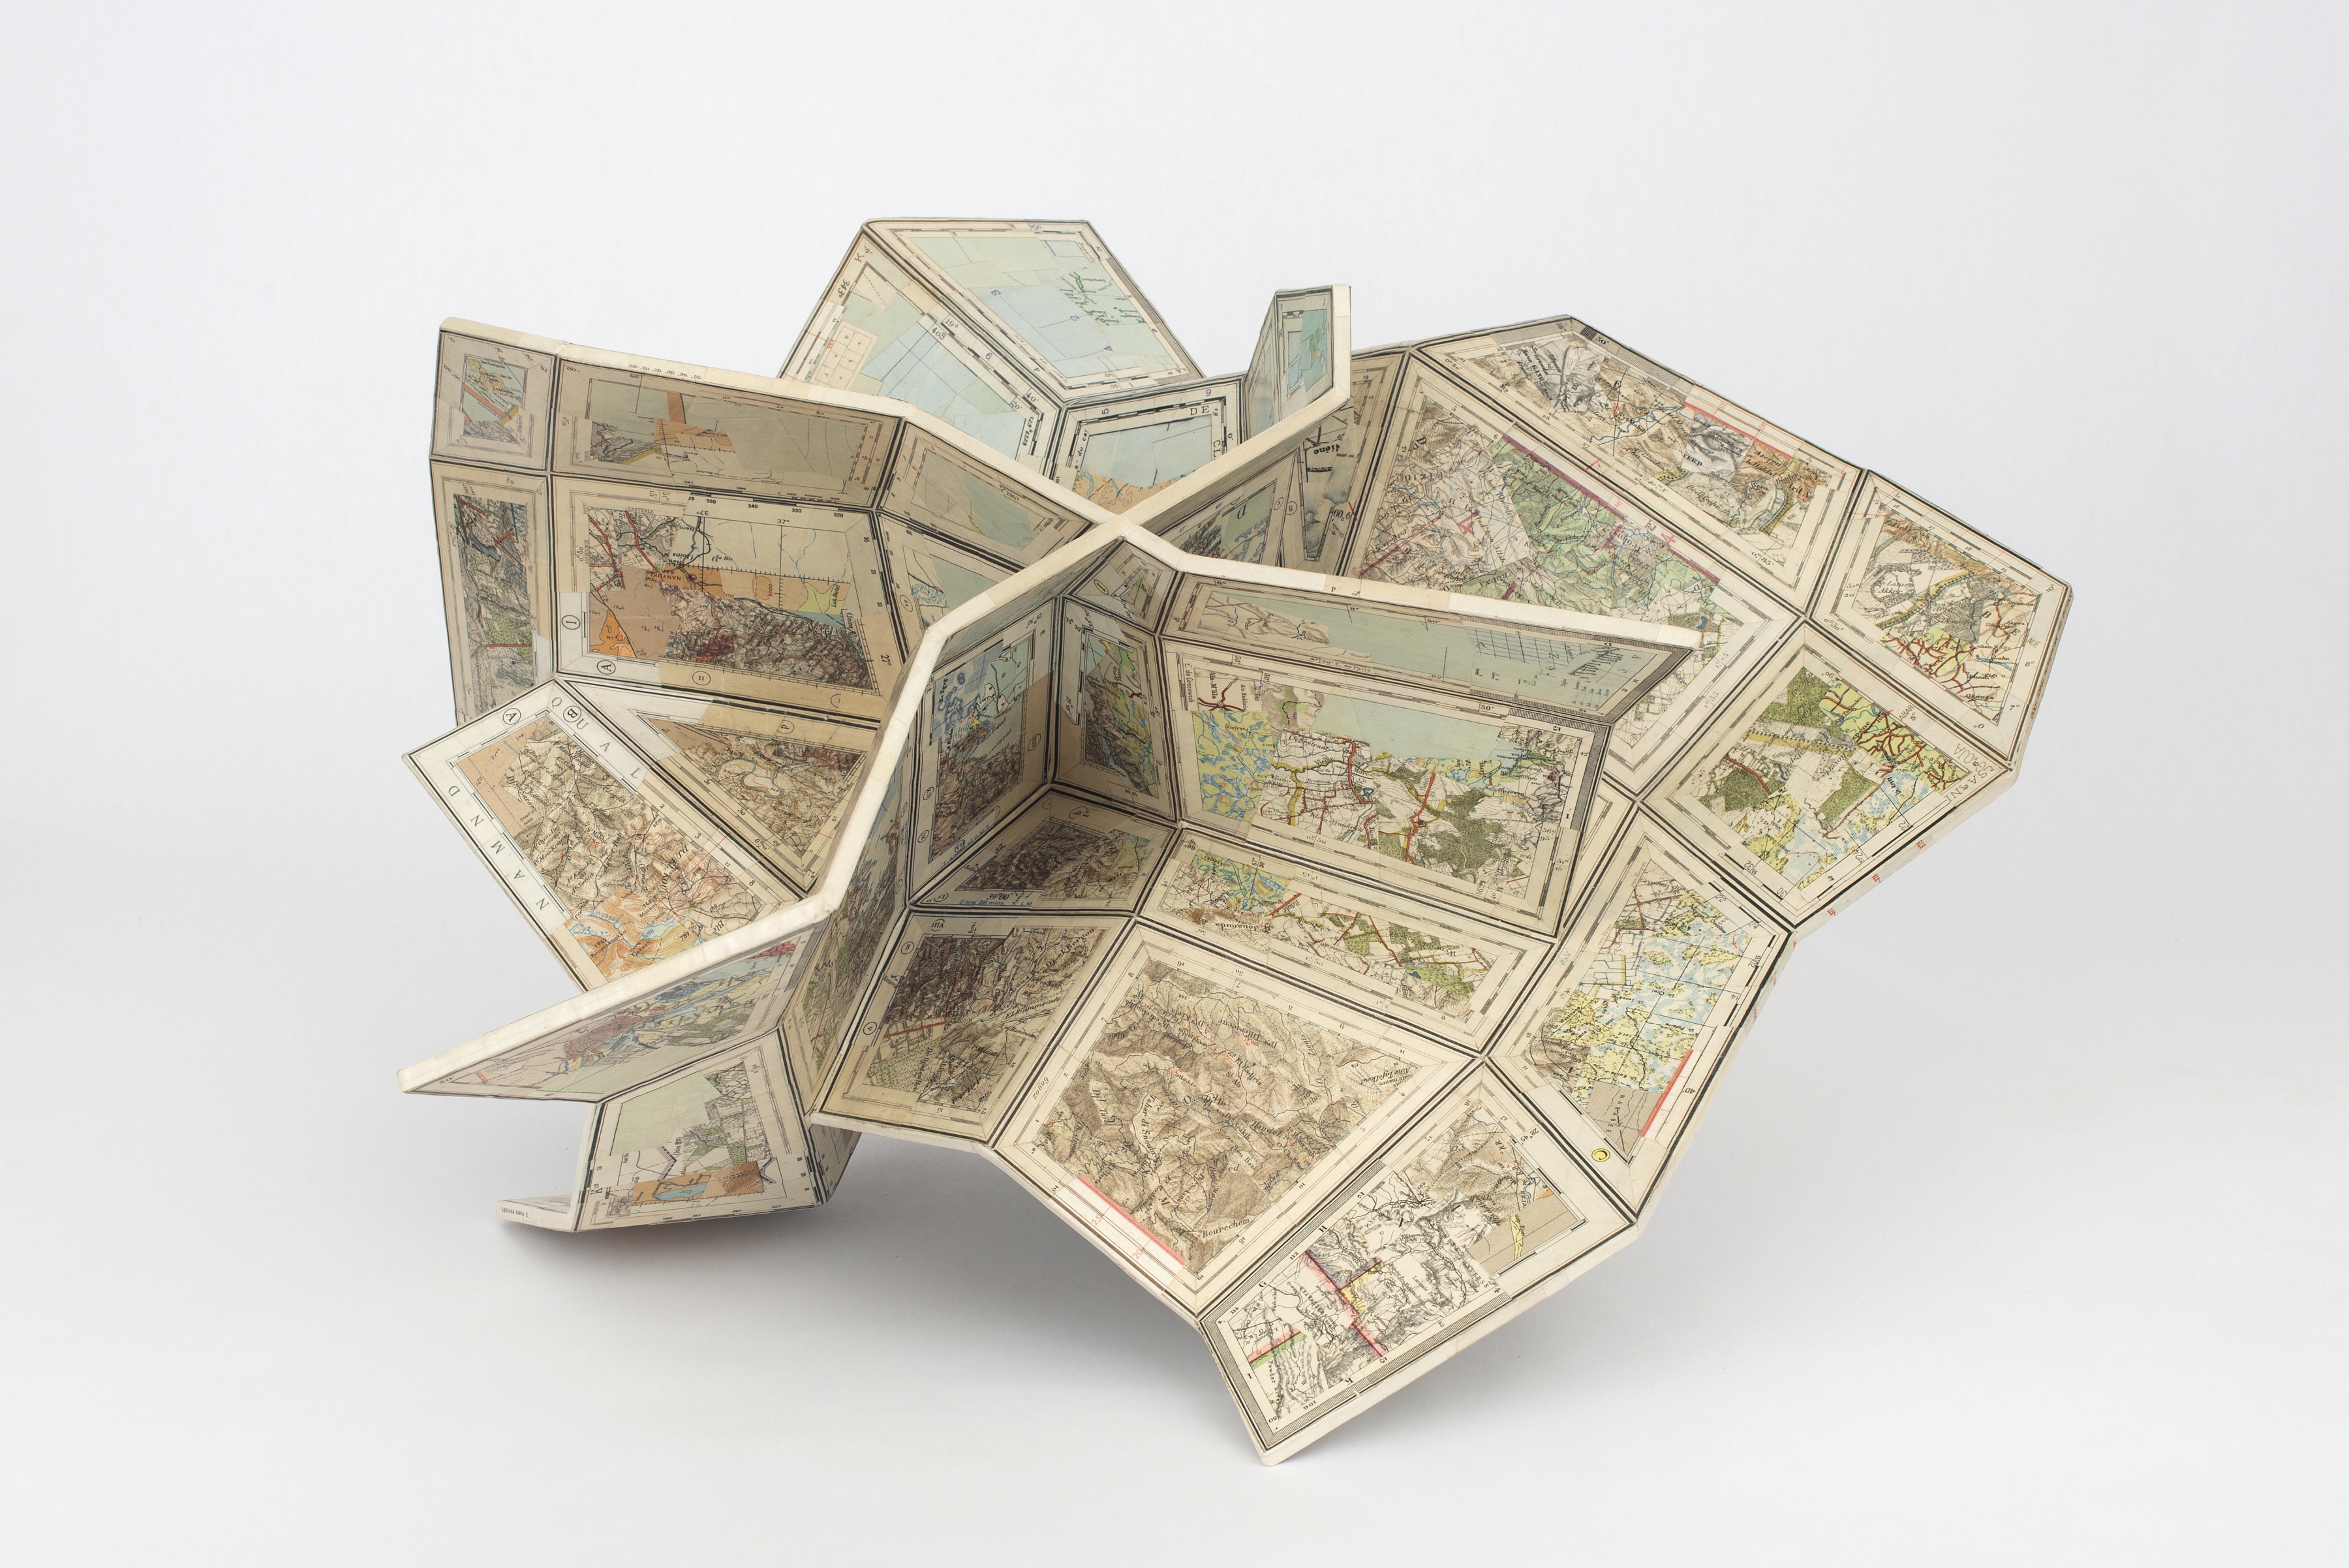 Landscape Object (Variable Globes), 2021&amp;nbsp;

Plywood and reconstituted map fragments&amp;nbsp;

38 x 64 x 66 cm / 15 x 25 x 26 in.

Enquire